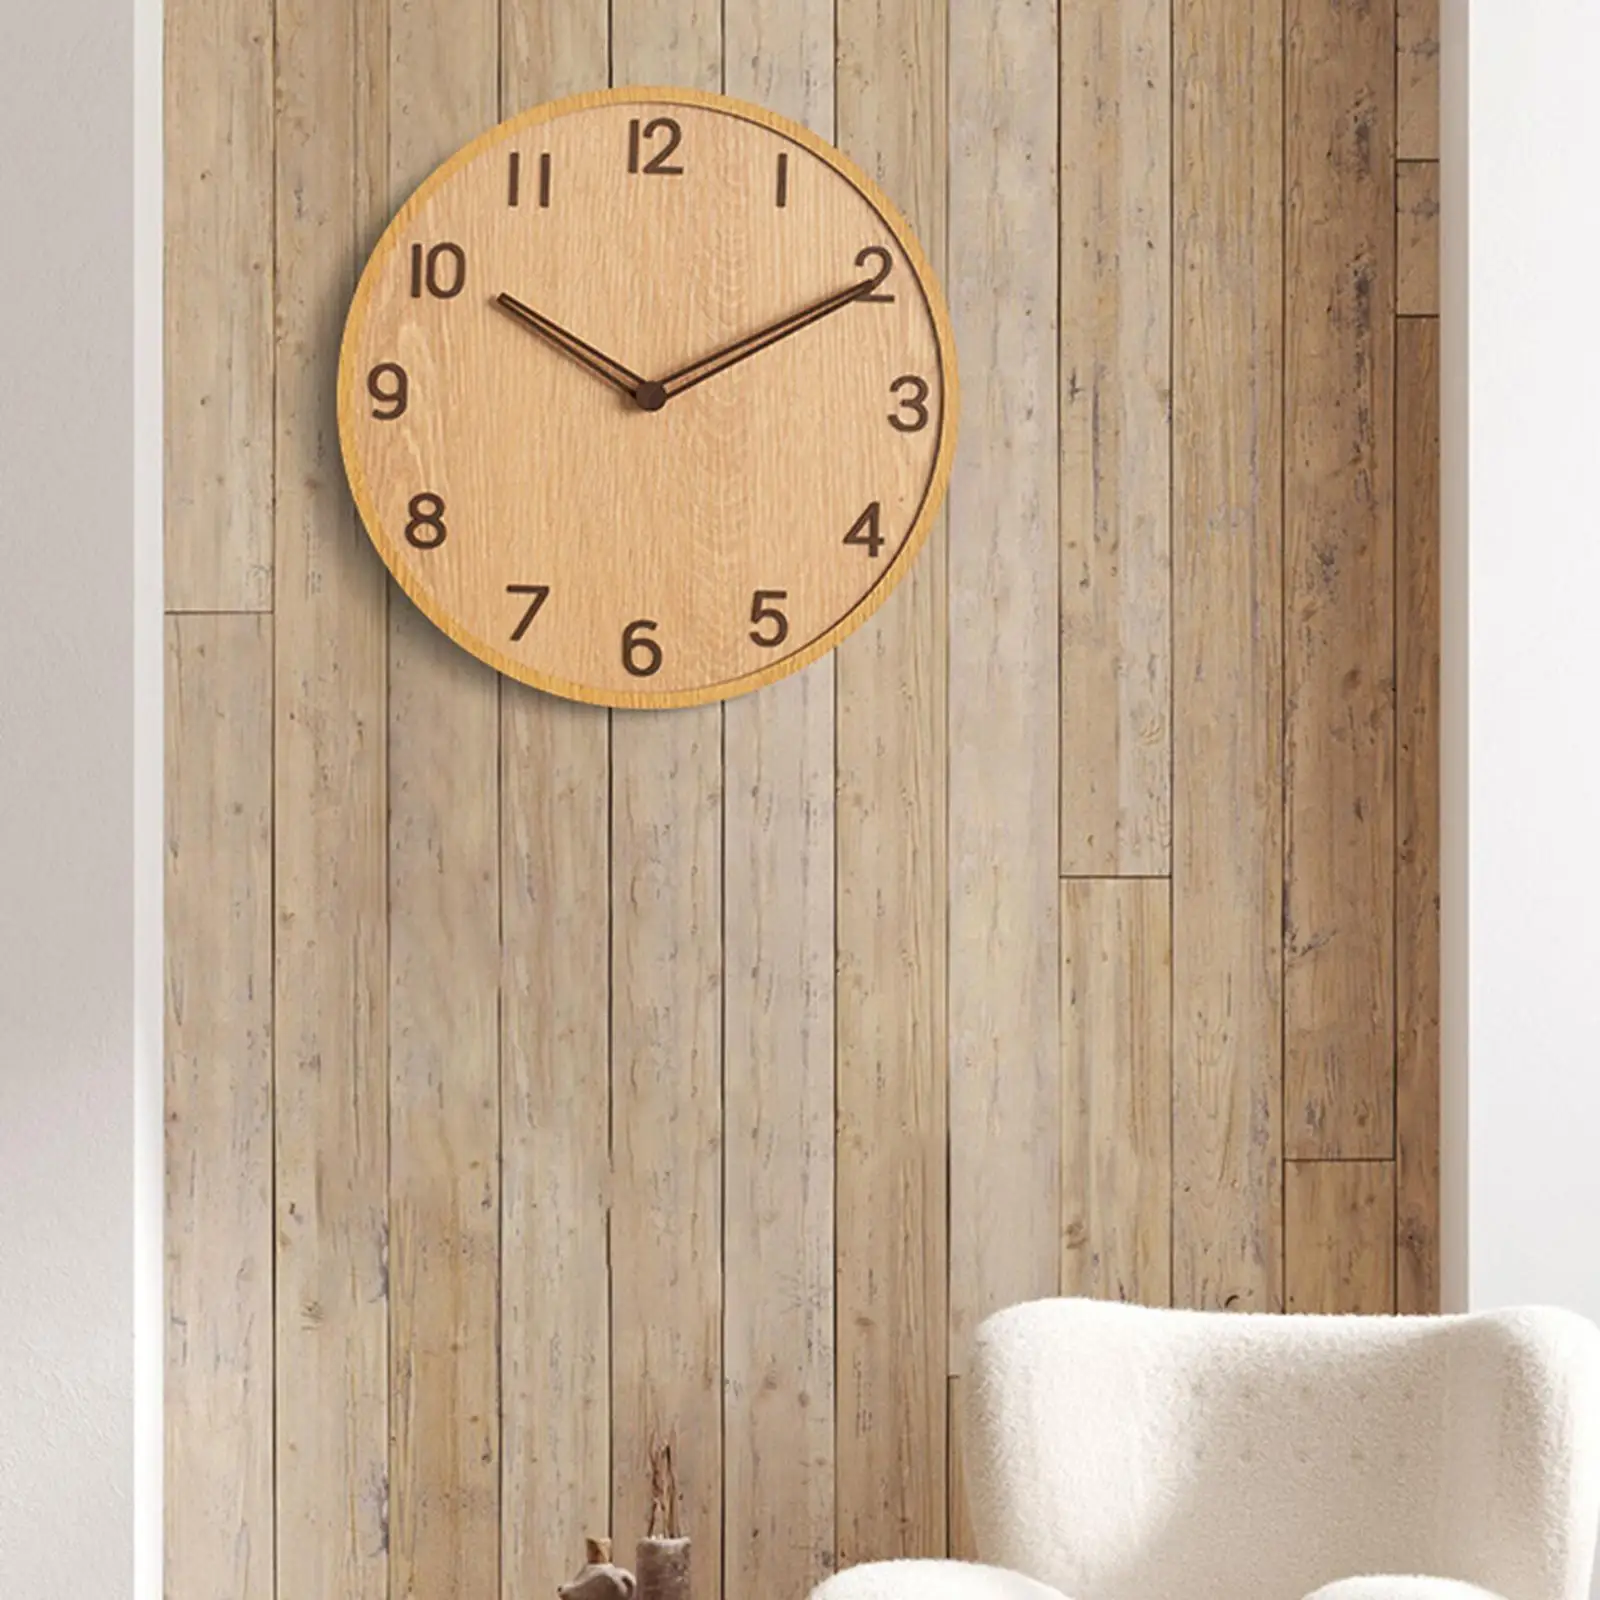 30cm Wooden Wall Clock Decorative Art Round Silent Silent Sweep for Home Kitchen School Indoor Office